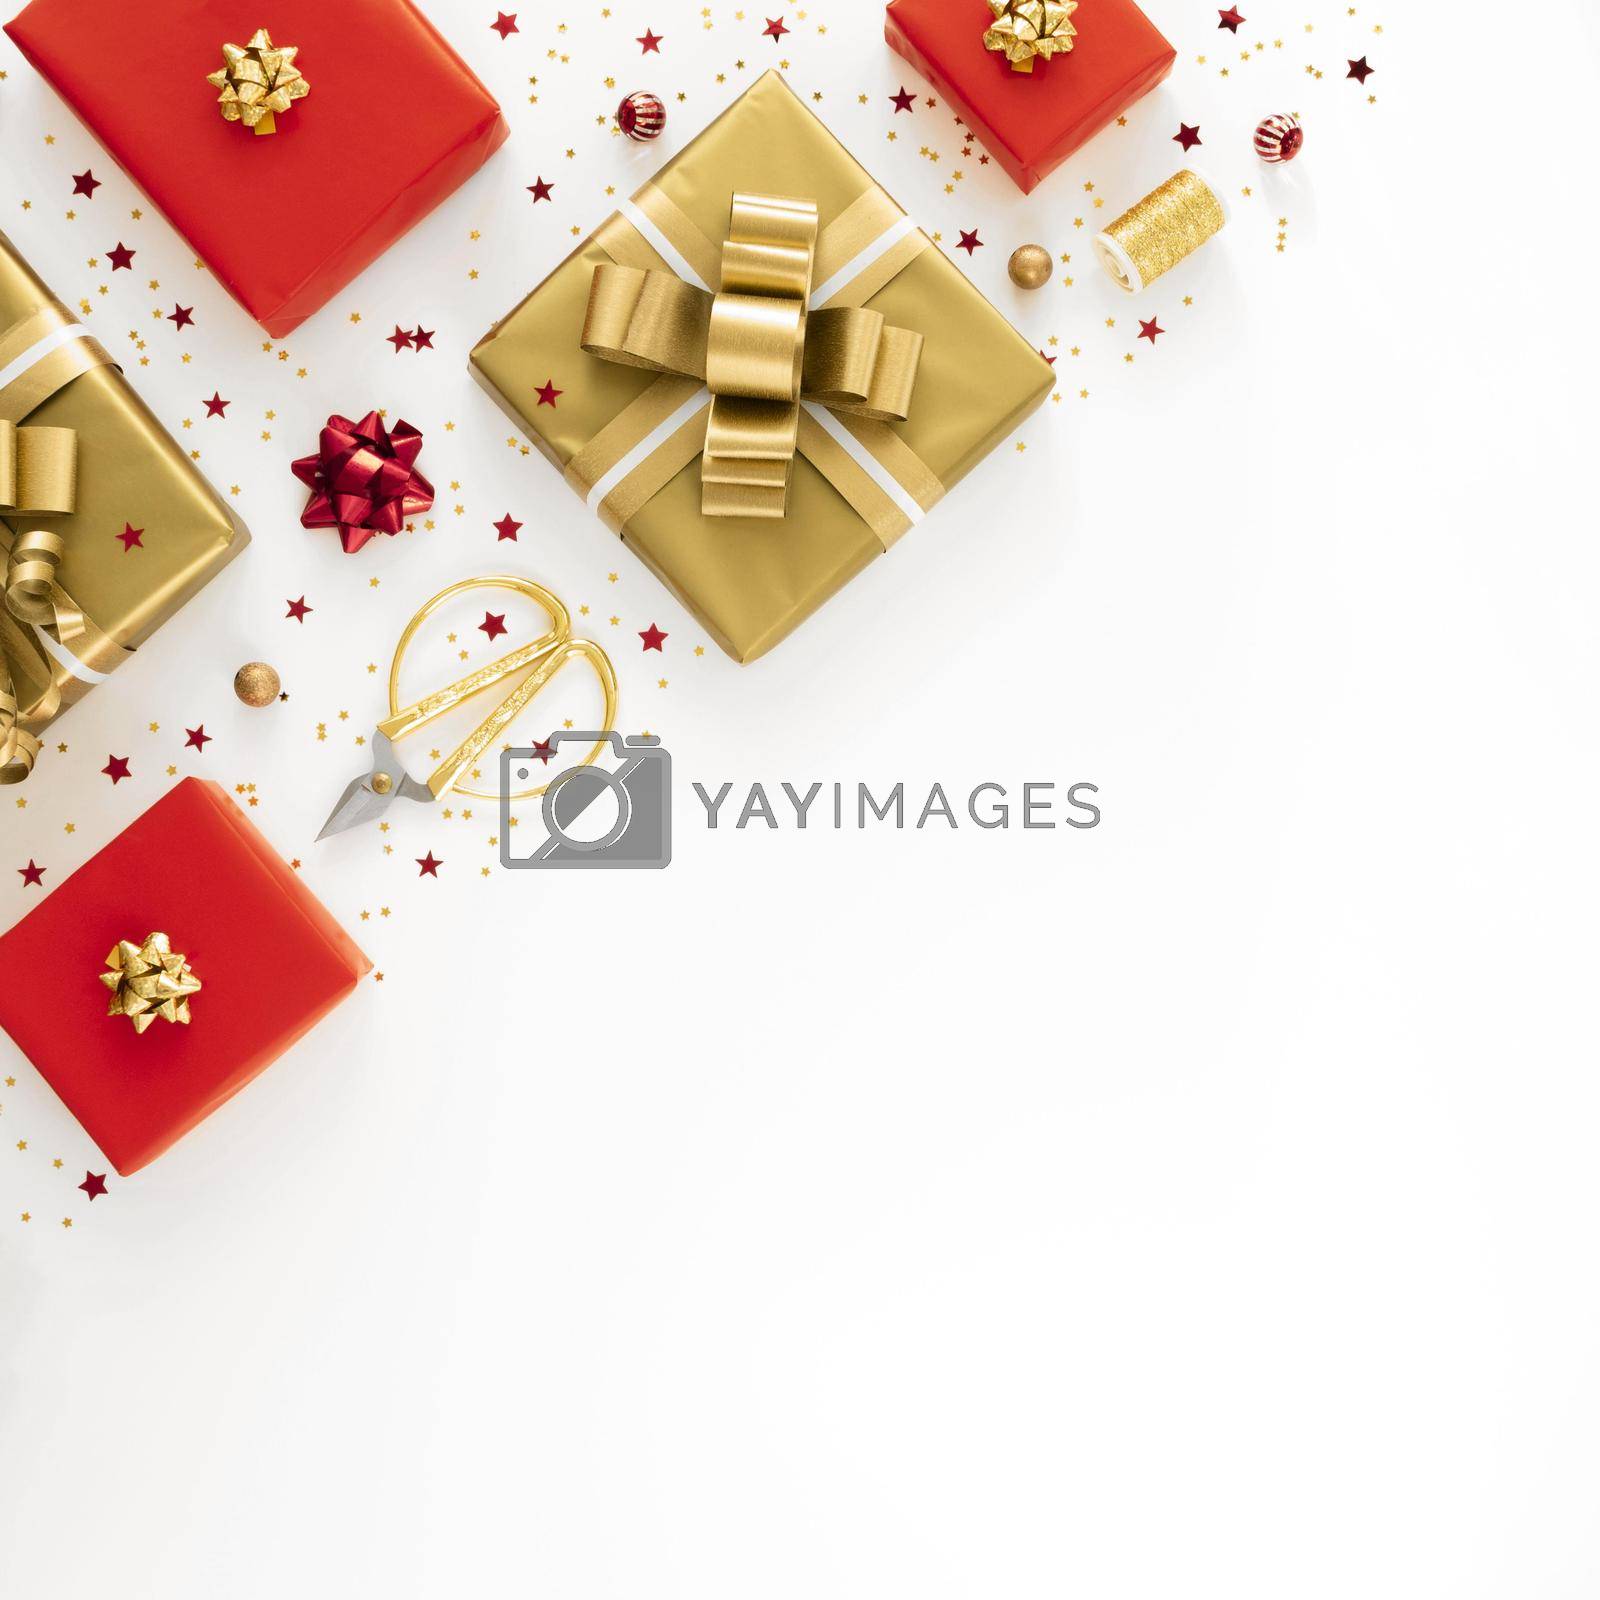 Royalty free image of flat lay arrangement festive wrapped presents with copy space by Zahard